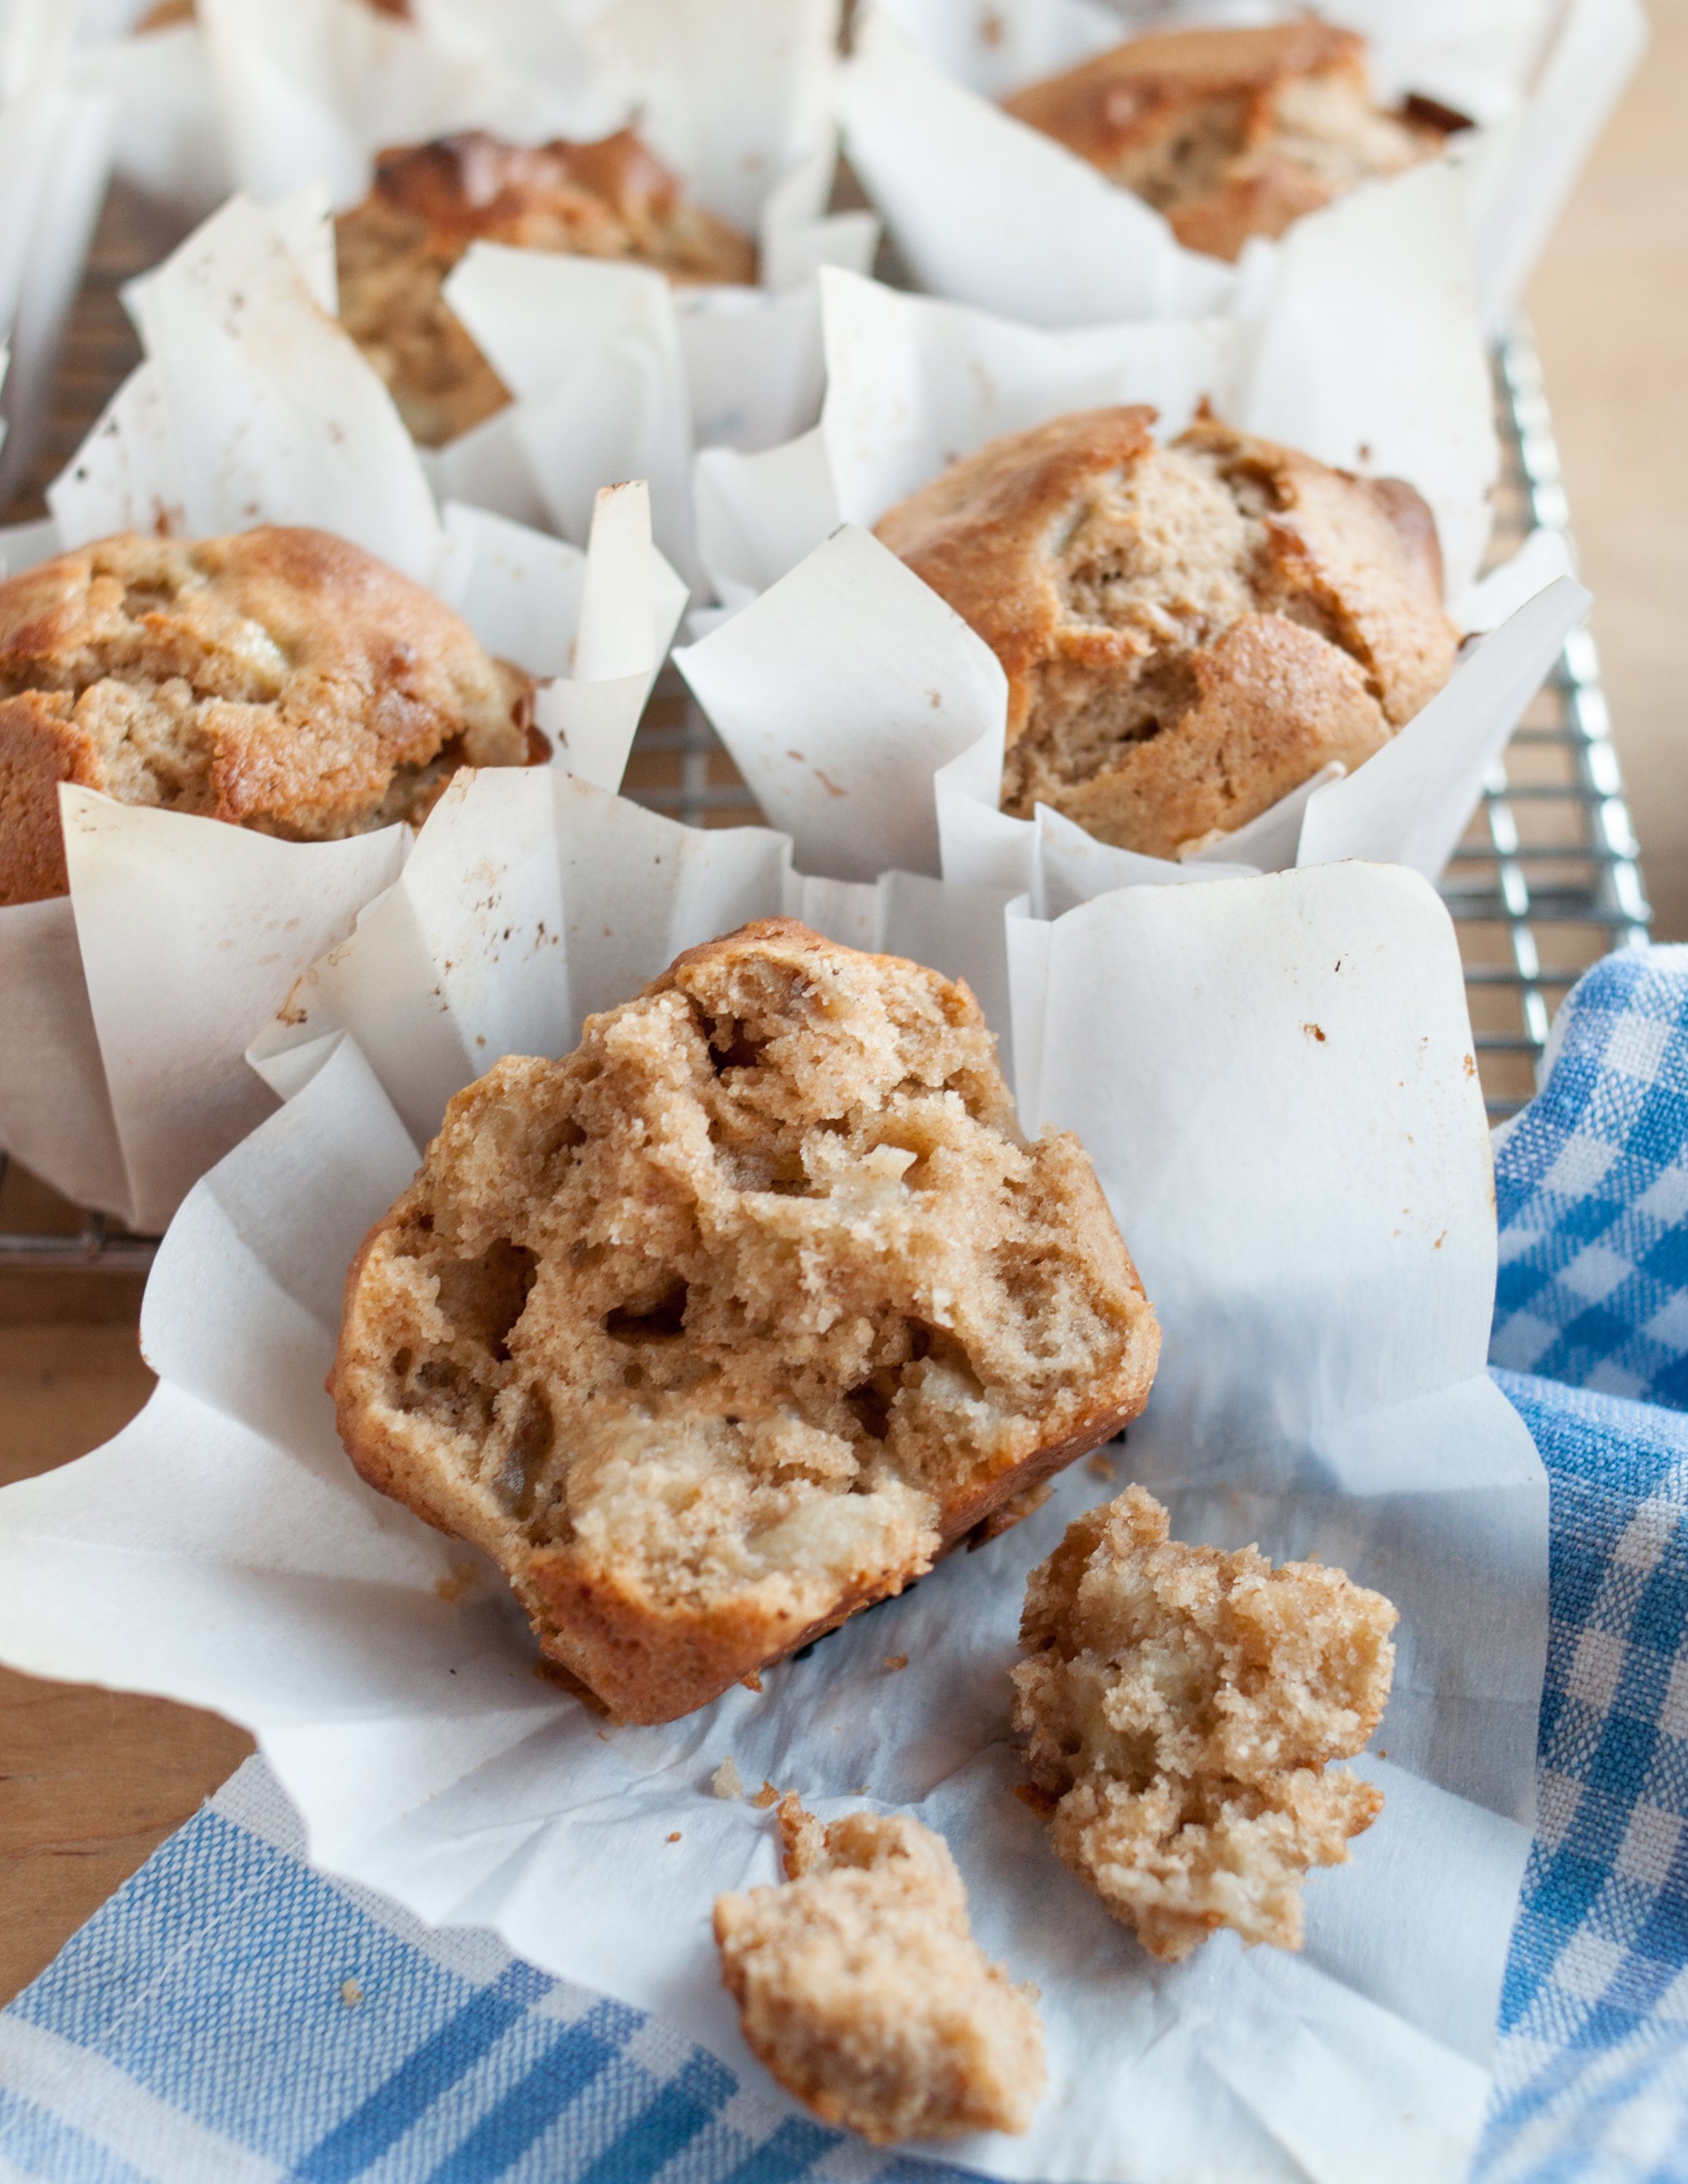 5 Mistakes to Avoid When Making Muffins